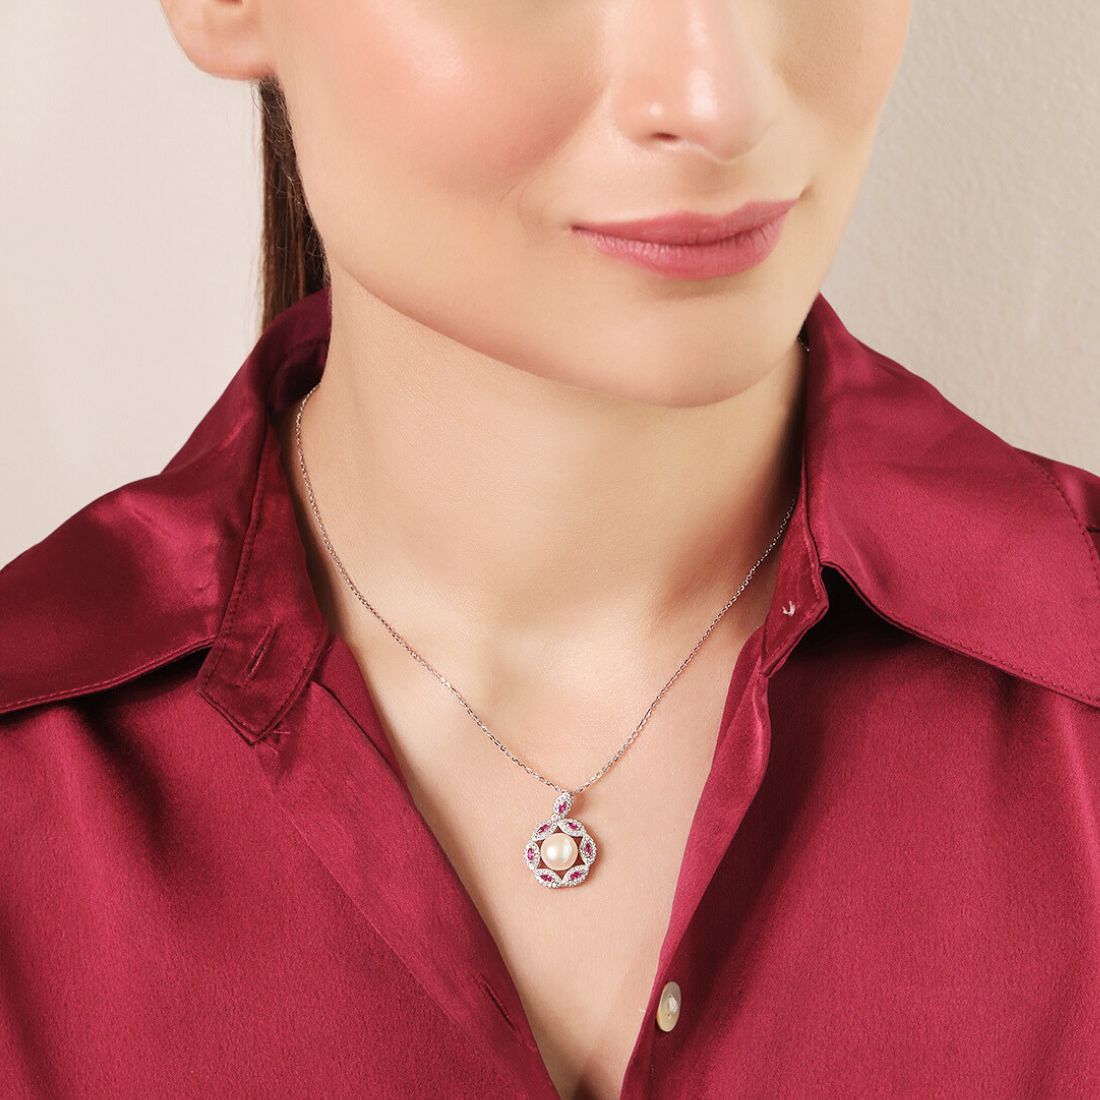 Pearl Radiance Harmony Rhodium-Plated 925 Sterling Silver Necklace